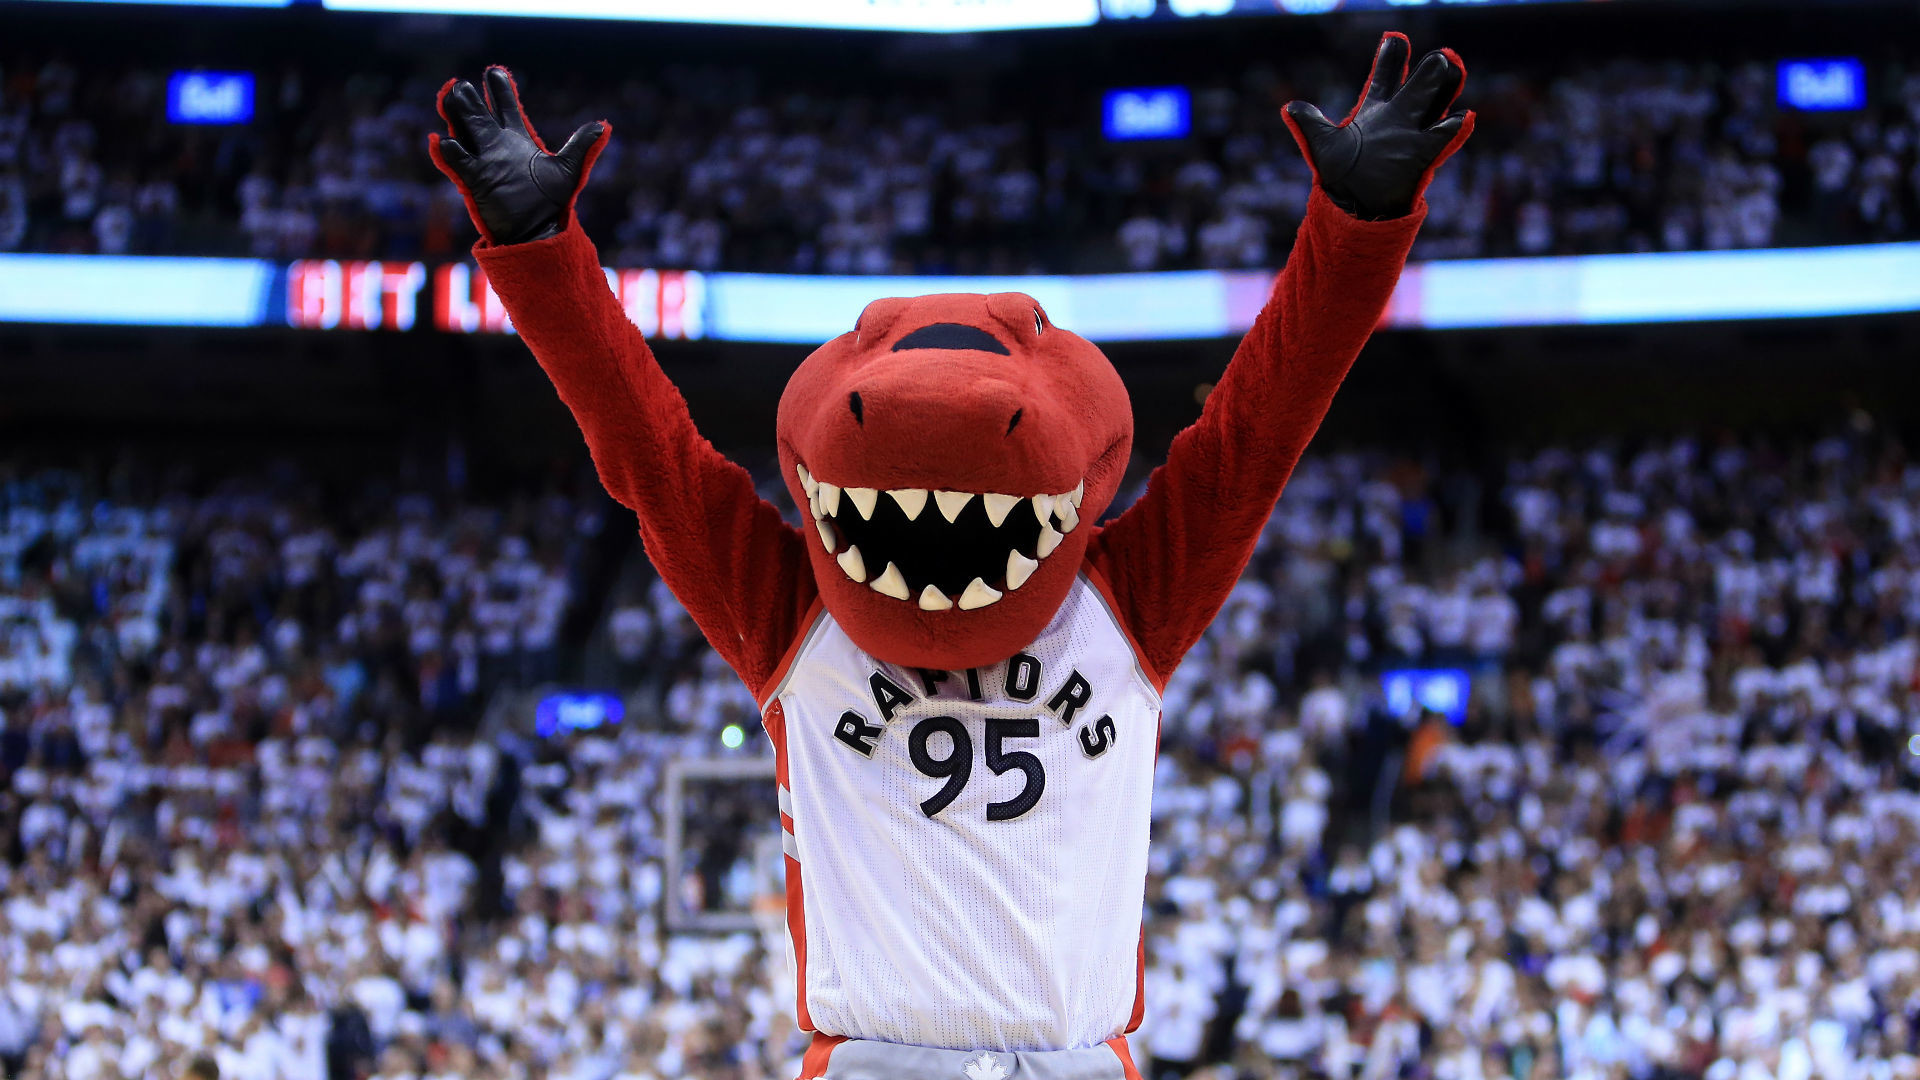 1920x1080 ... contestant loses everything on NBA mascot clue, and that's just fine  ... nba mascot raptors toronto ...